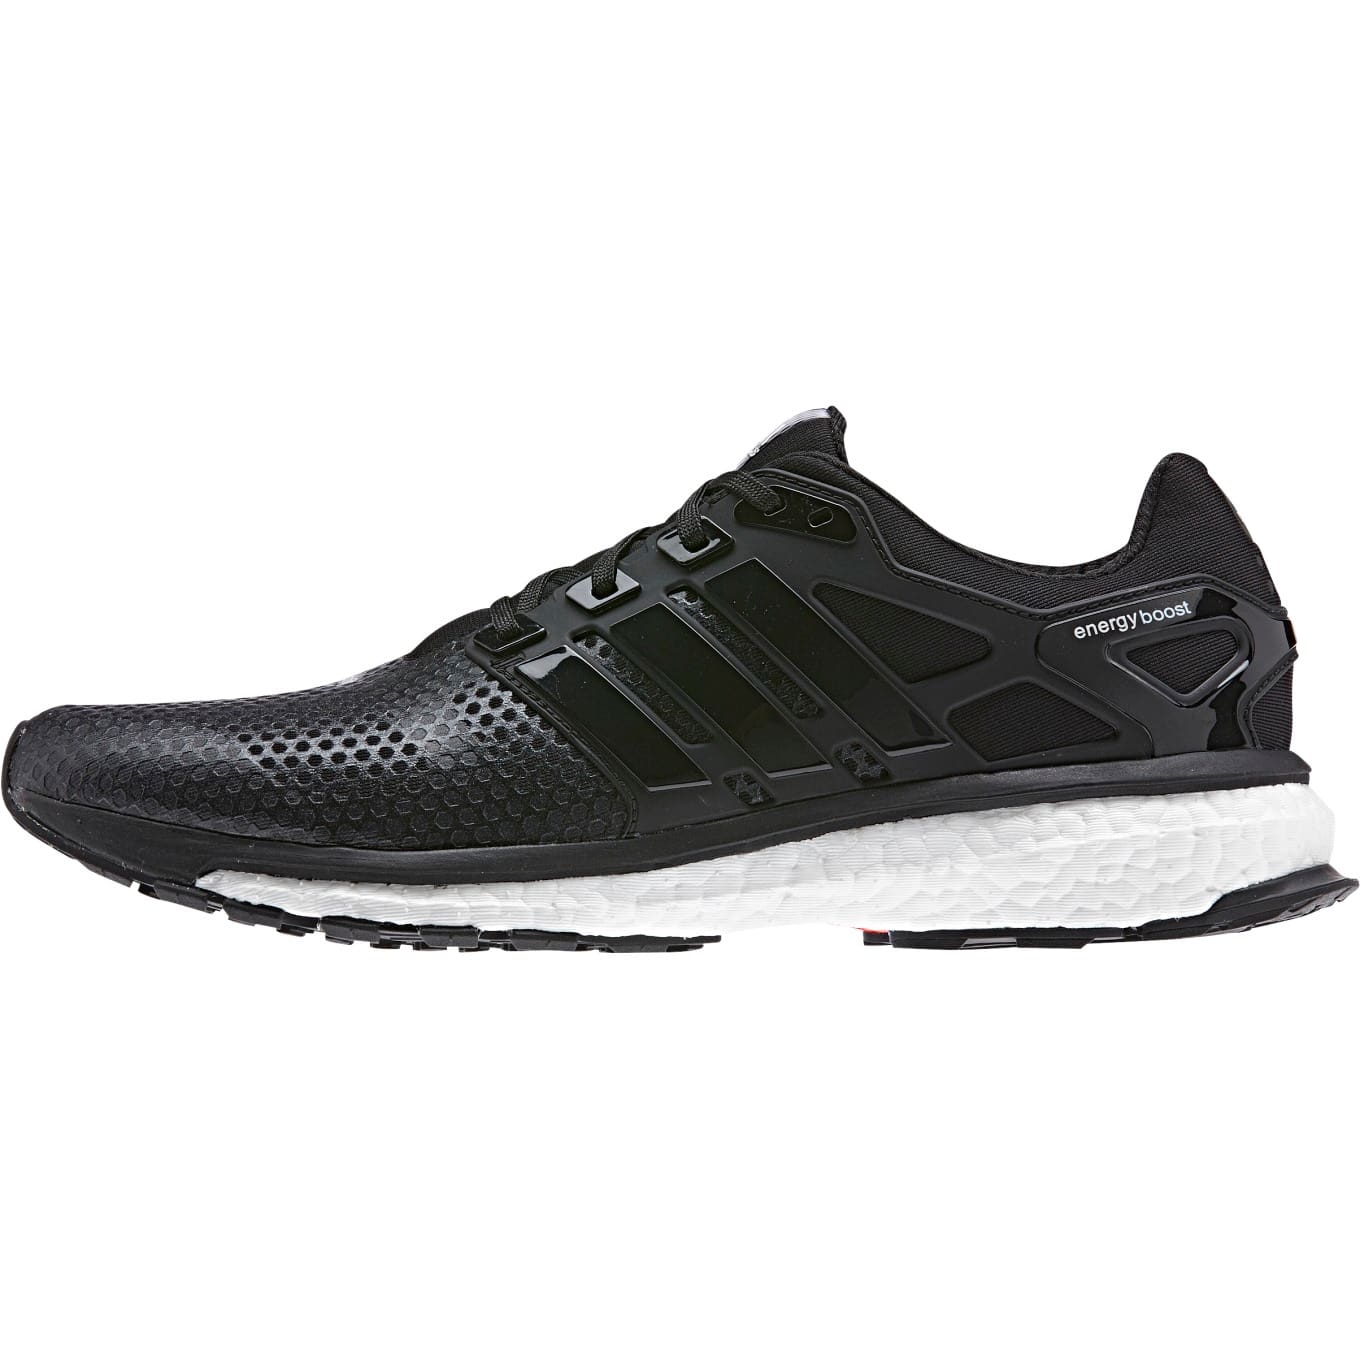 Buy ADIDAS Energy Boost 2 ATR M from Outnorth